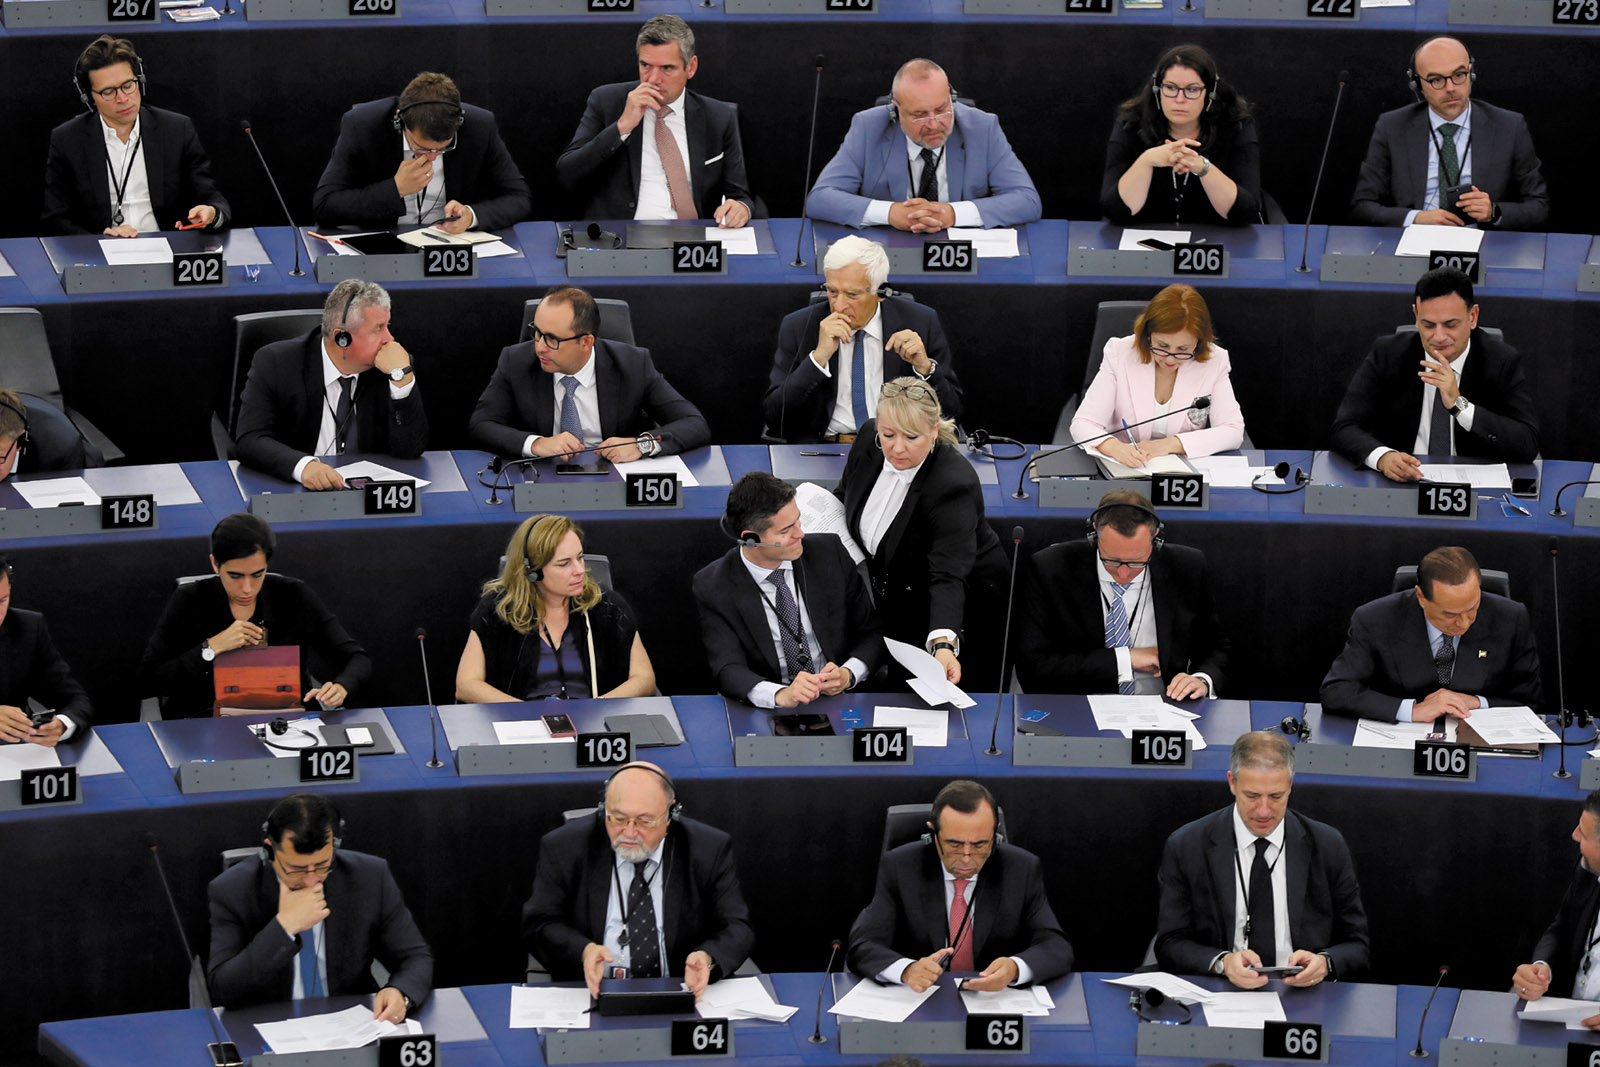 Members of the European Parliament in a plenary session to elect their new president, Strasbourg, July 3, 2019